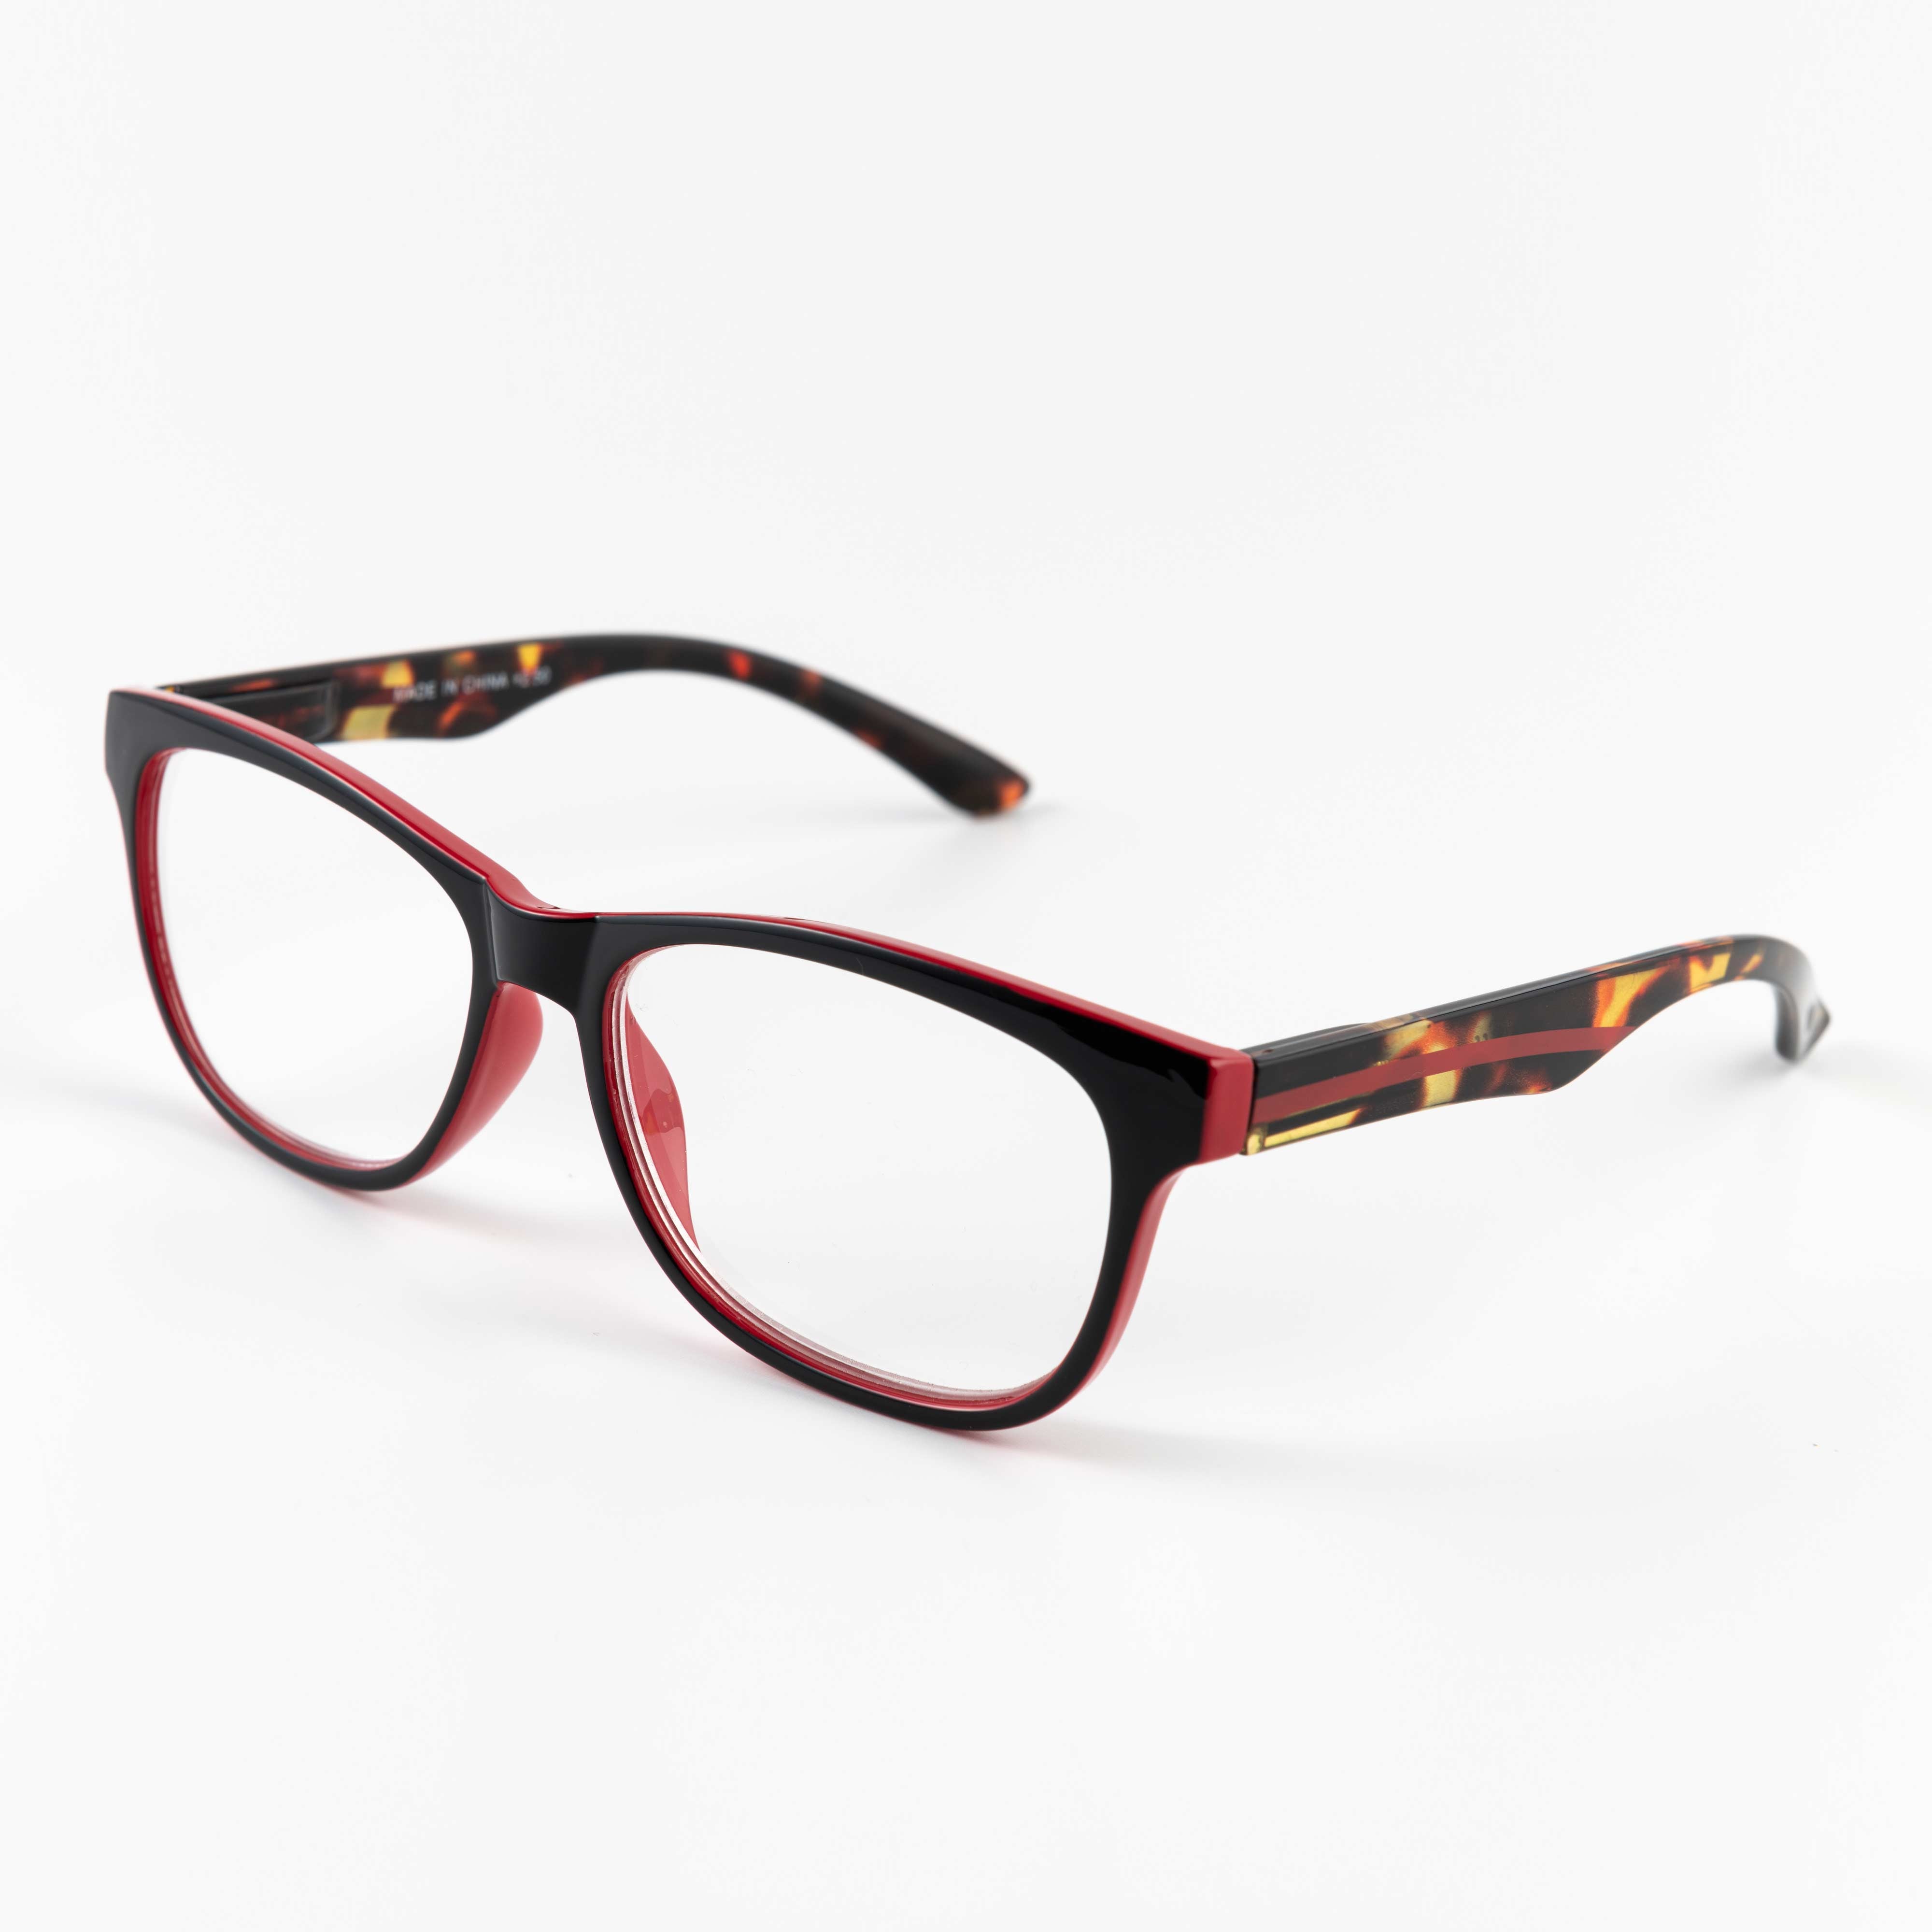 Red rectangle reading glasses